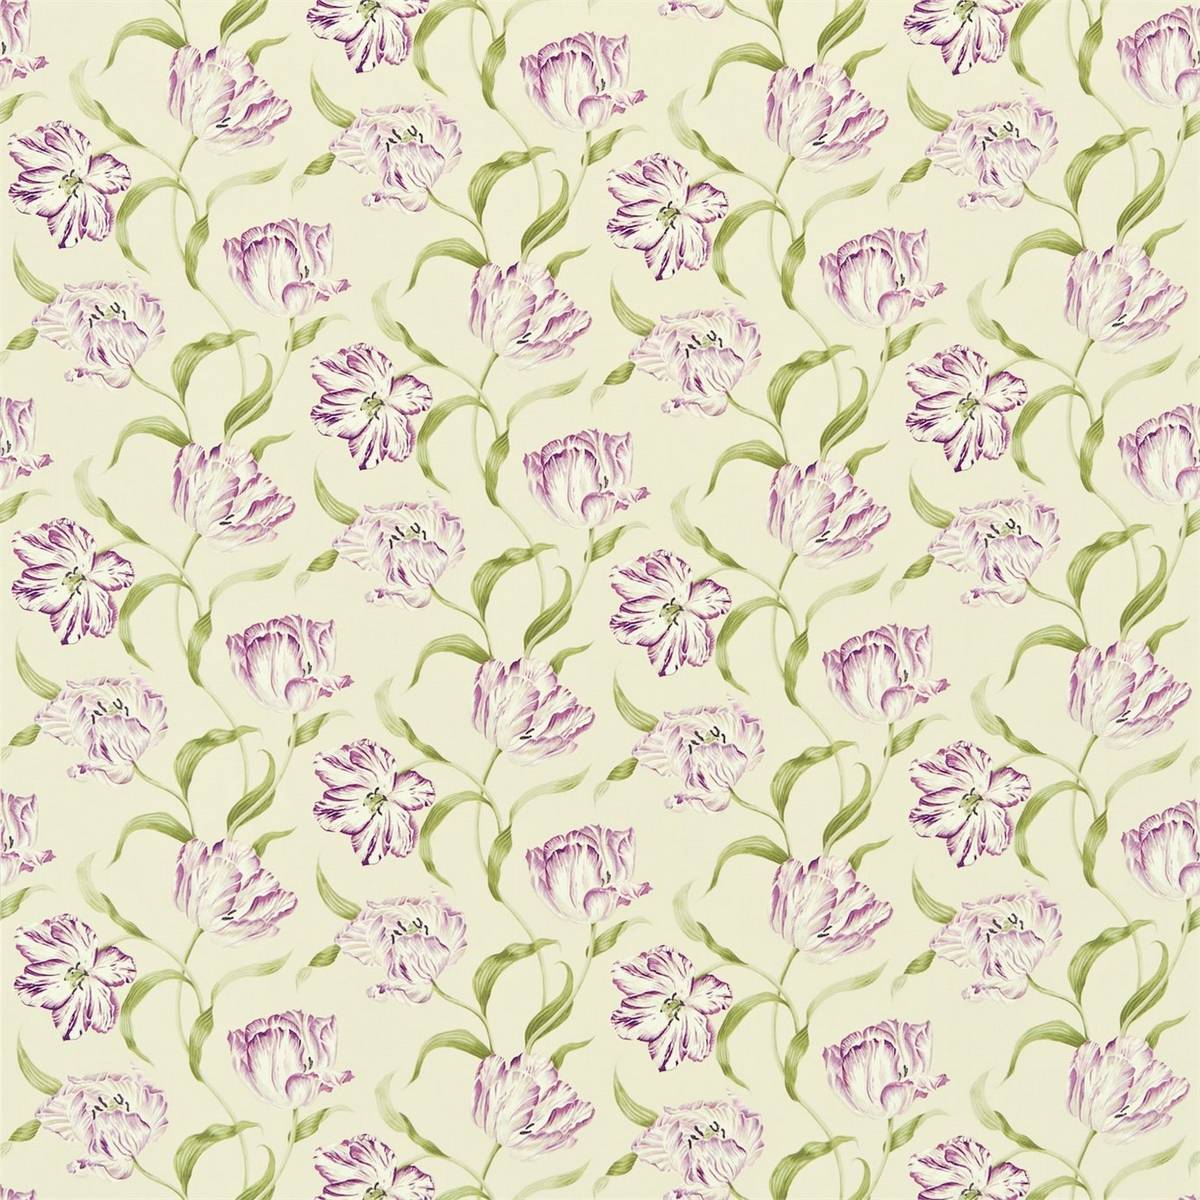 Dancing Tulips Lilac/Stone Fabric by Sanderson